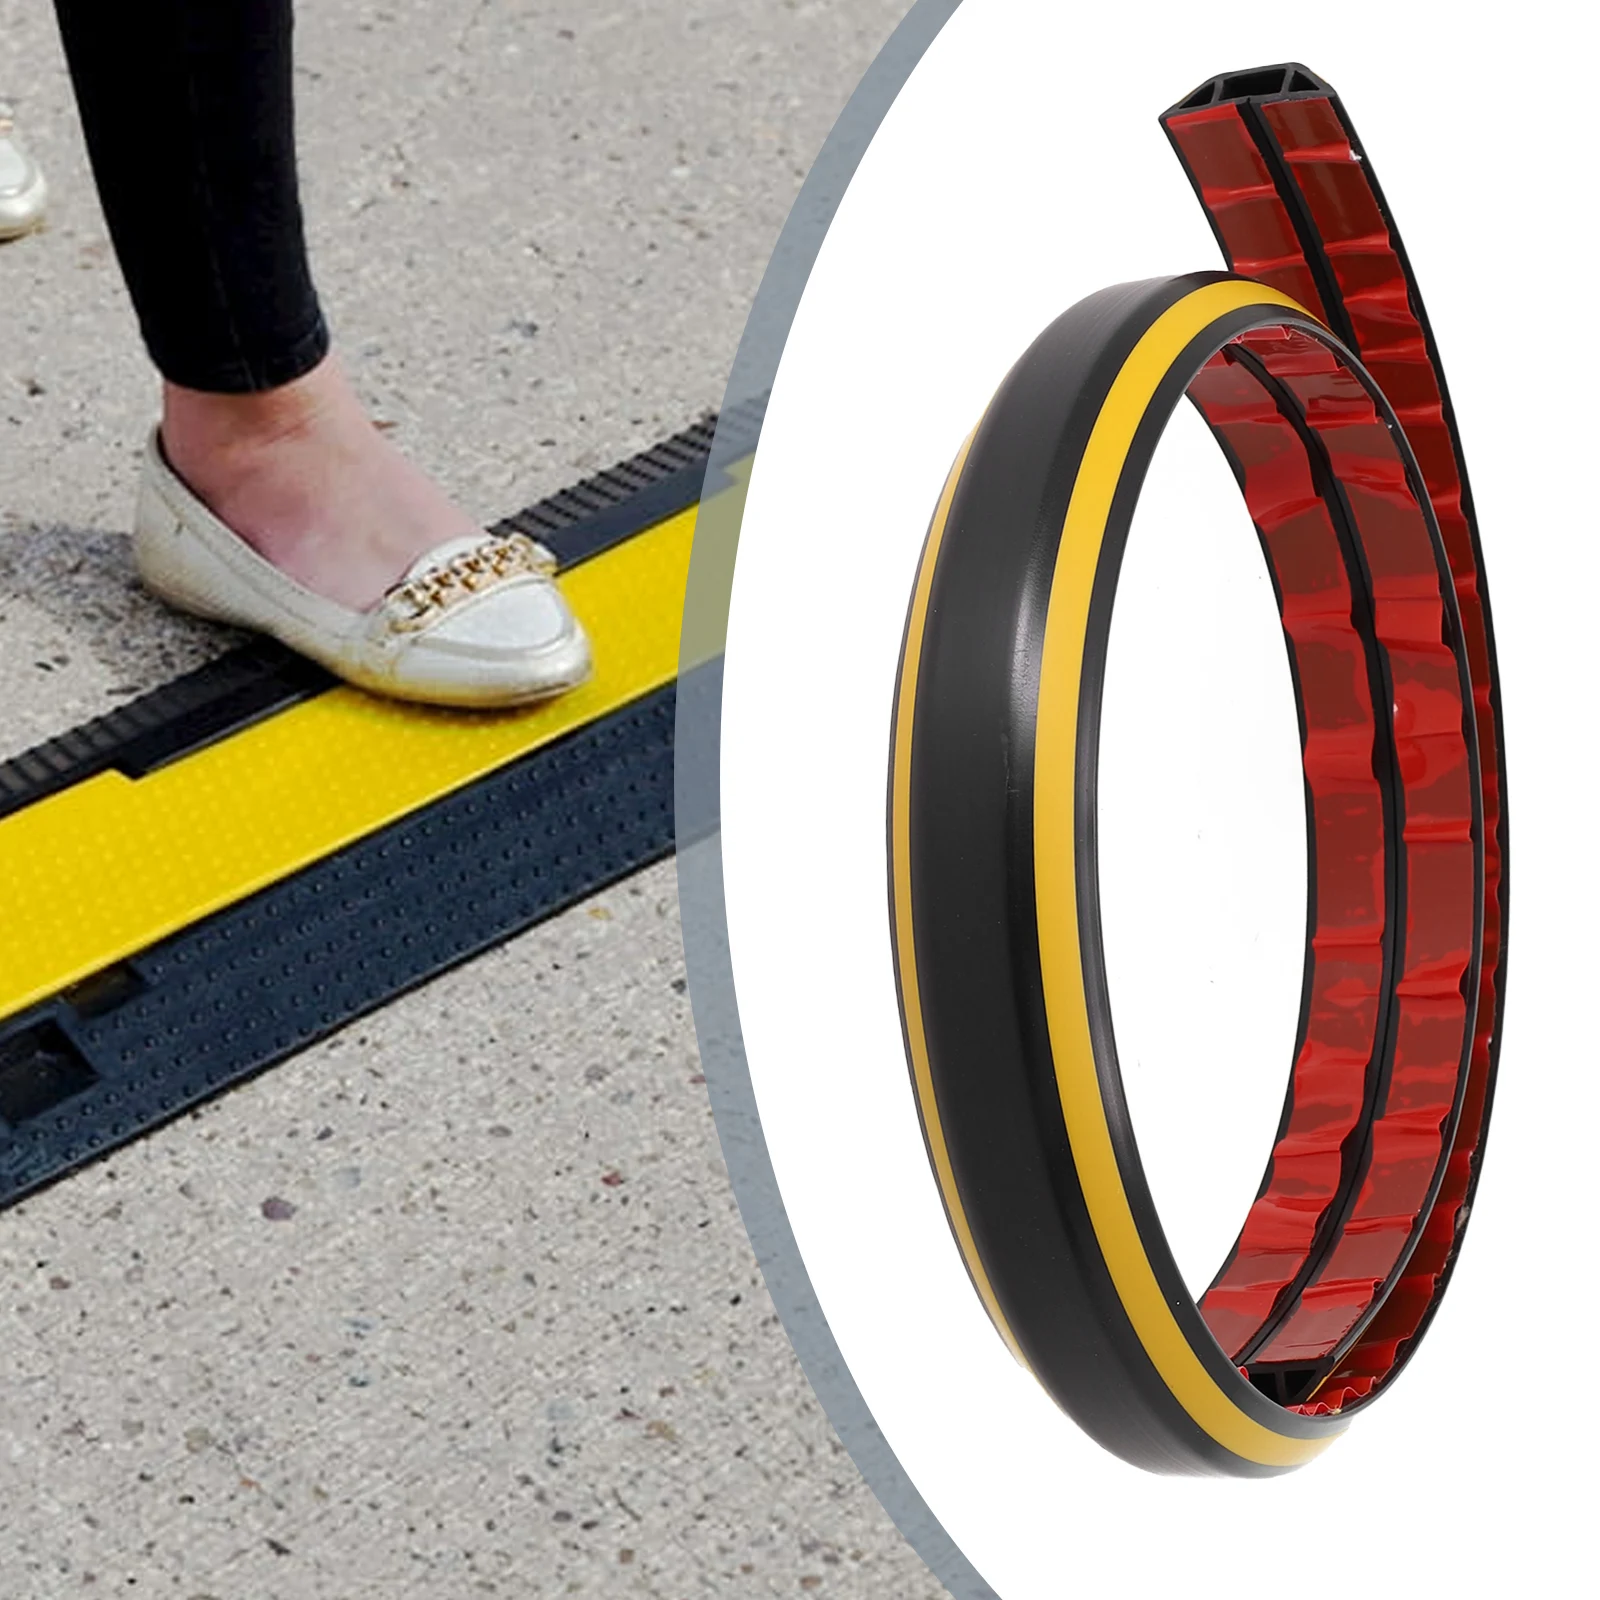 

1pcs D40/D50 1 Meter Heavy Duty Floor Cable Protection Cover Floor Cable Cover Rubber Trunking Soft PVC Cable Protectors